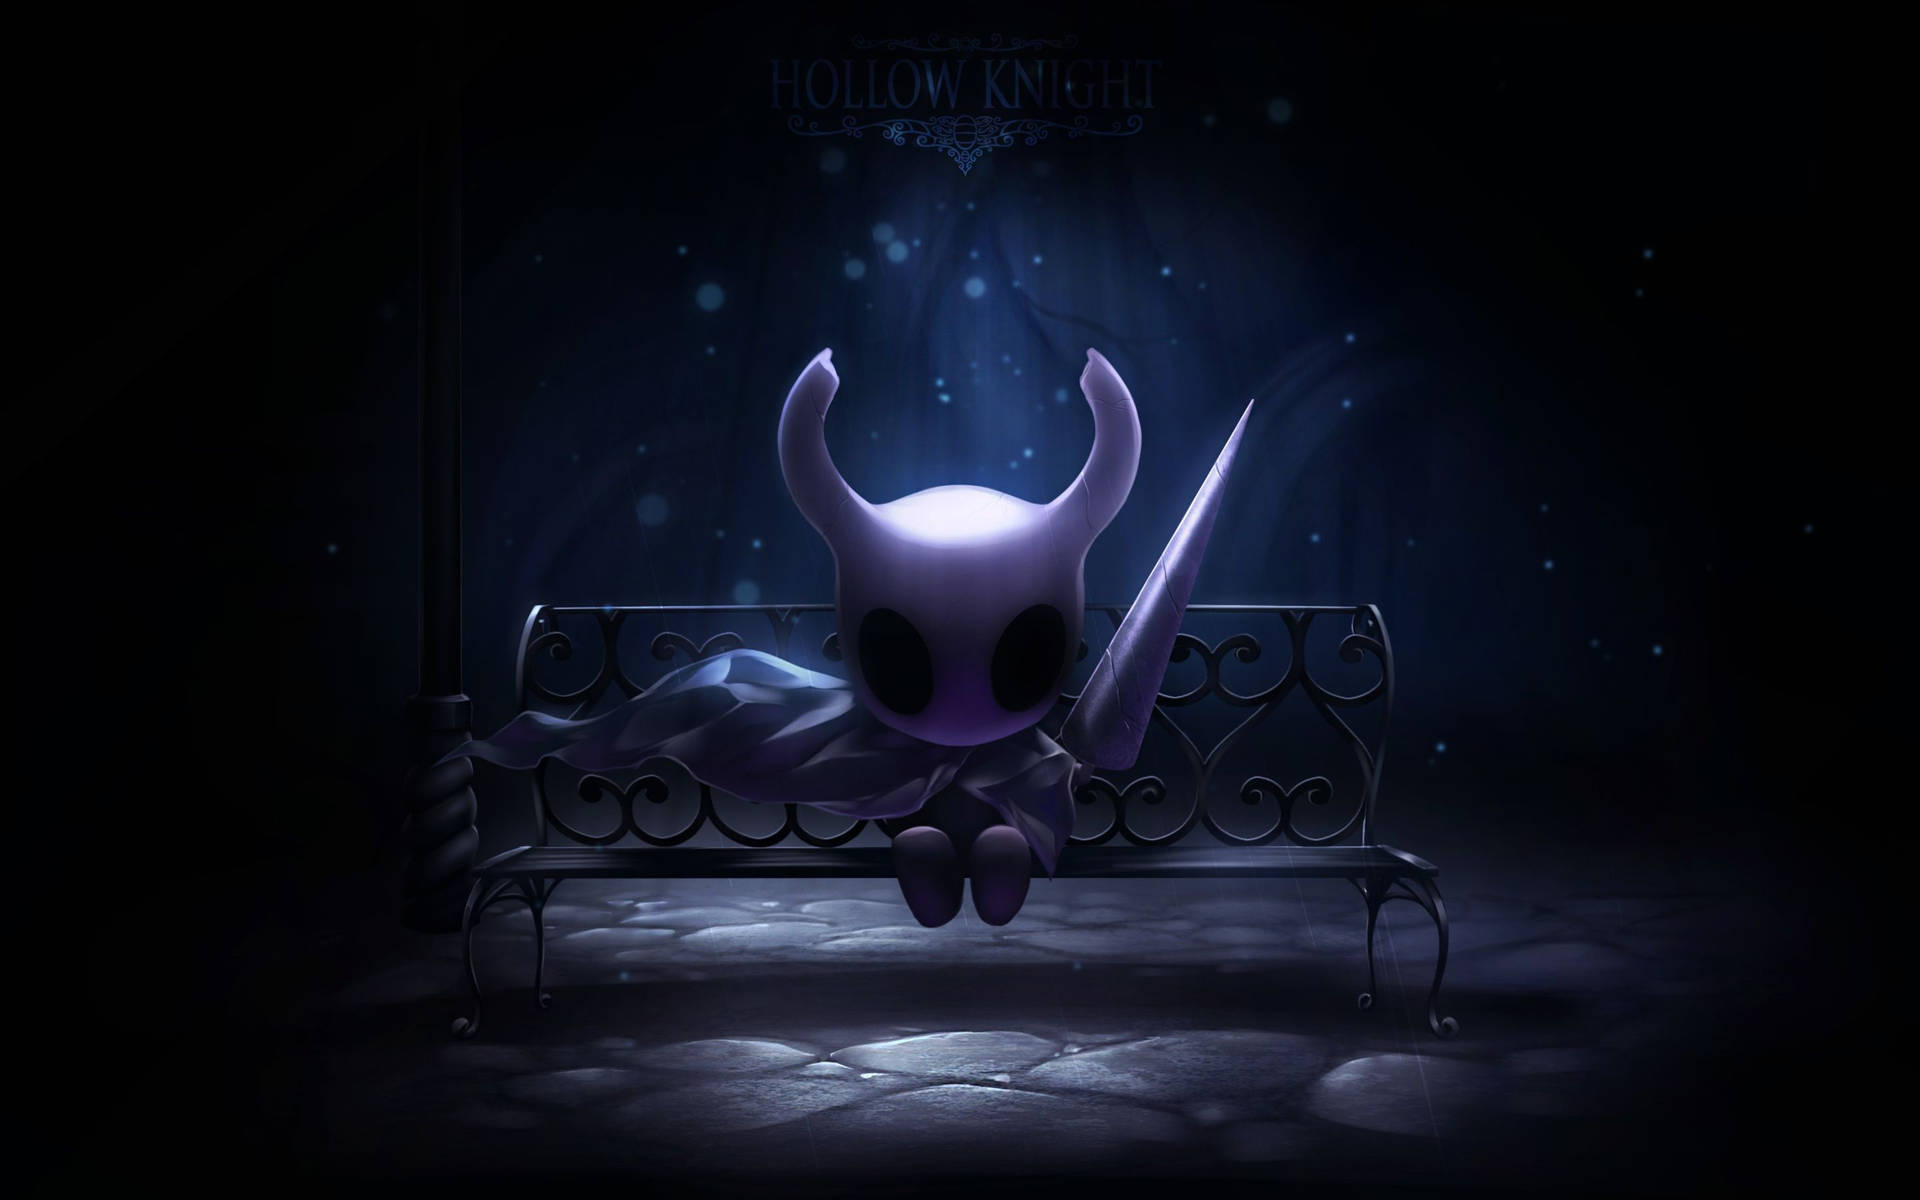 Brave the adventurer Hollow Knight overcomes trials and enemies Wallpaper